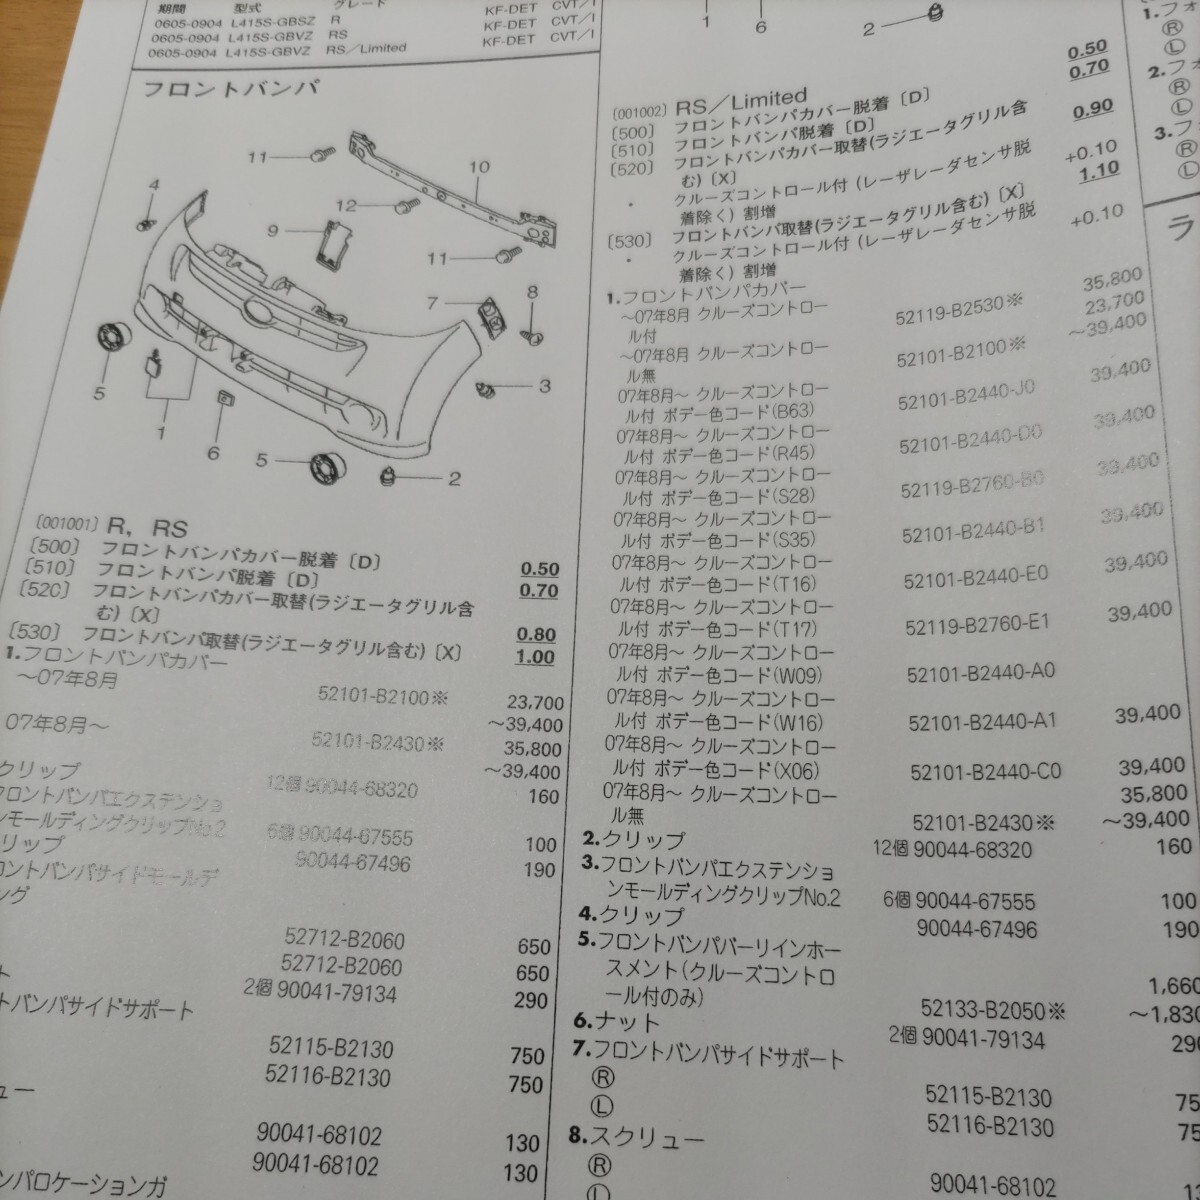 **[ parts guide ] Daihatsu Sonica (L405*415 series )H18.5~ 2010 year latter term version [ out of print * rare ]